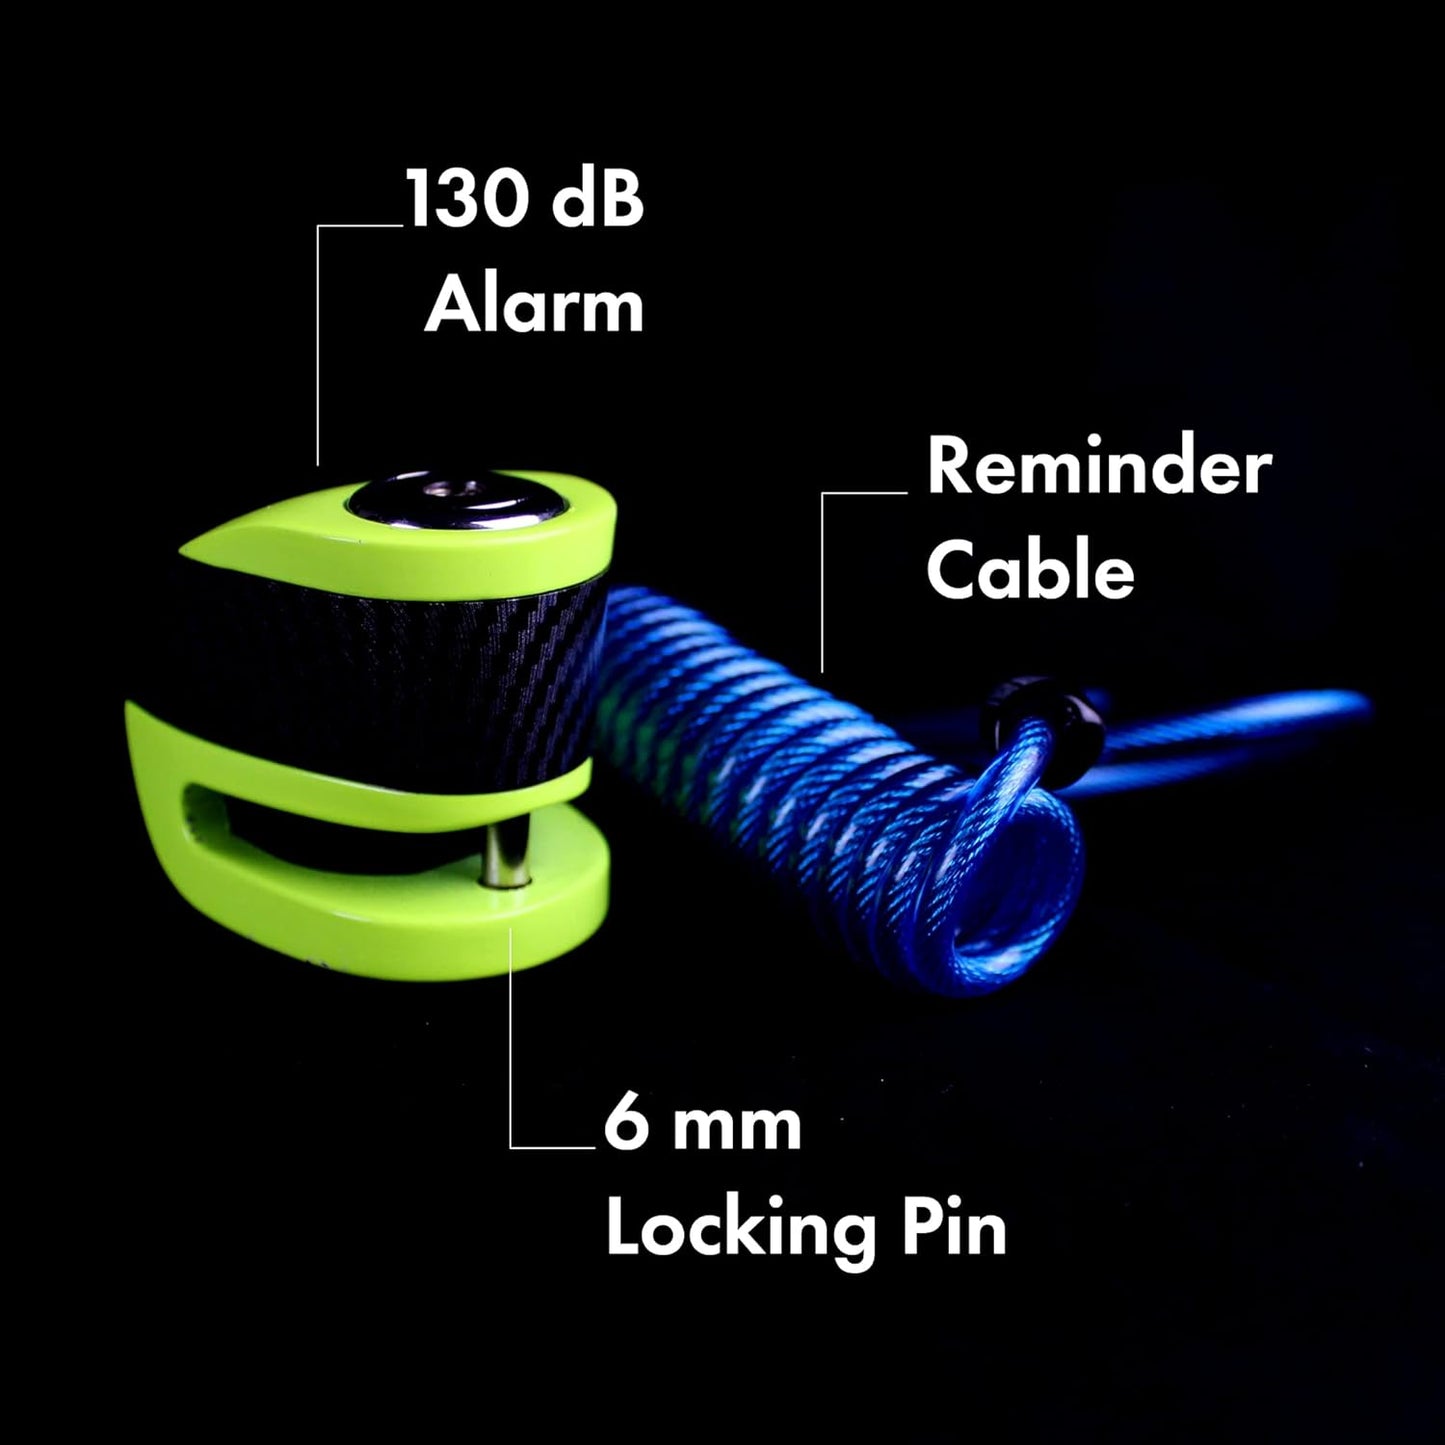 The image showcases a disc lock security system featuring a 130 dB alarm for high alert security. Accompanying the lock is a reminder cable, coiled and colored blue, to prevent an attempt to drive away while the lock is engaged. The lock itself is equipped with a 6 mm locking pin, which is a standard size for securing bike or motorcycle discs. The design is compact and functional with a striking green and black color scheme that likely serves both aesthetic and visibility purposes. 